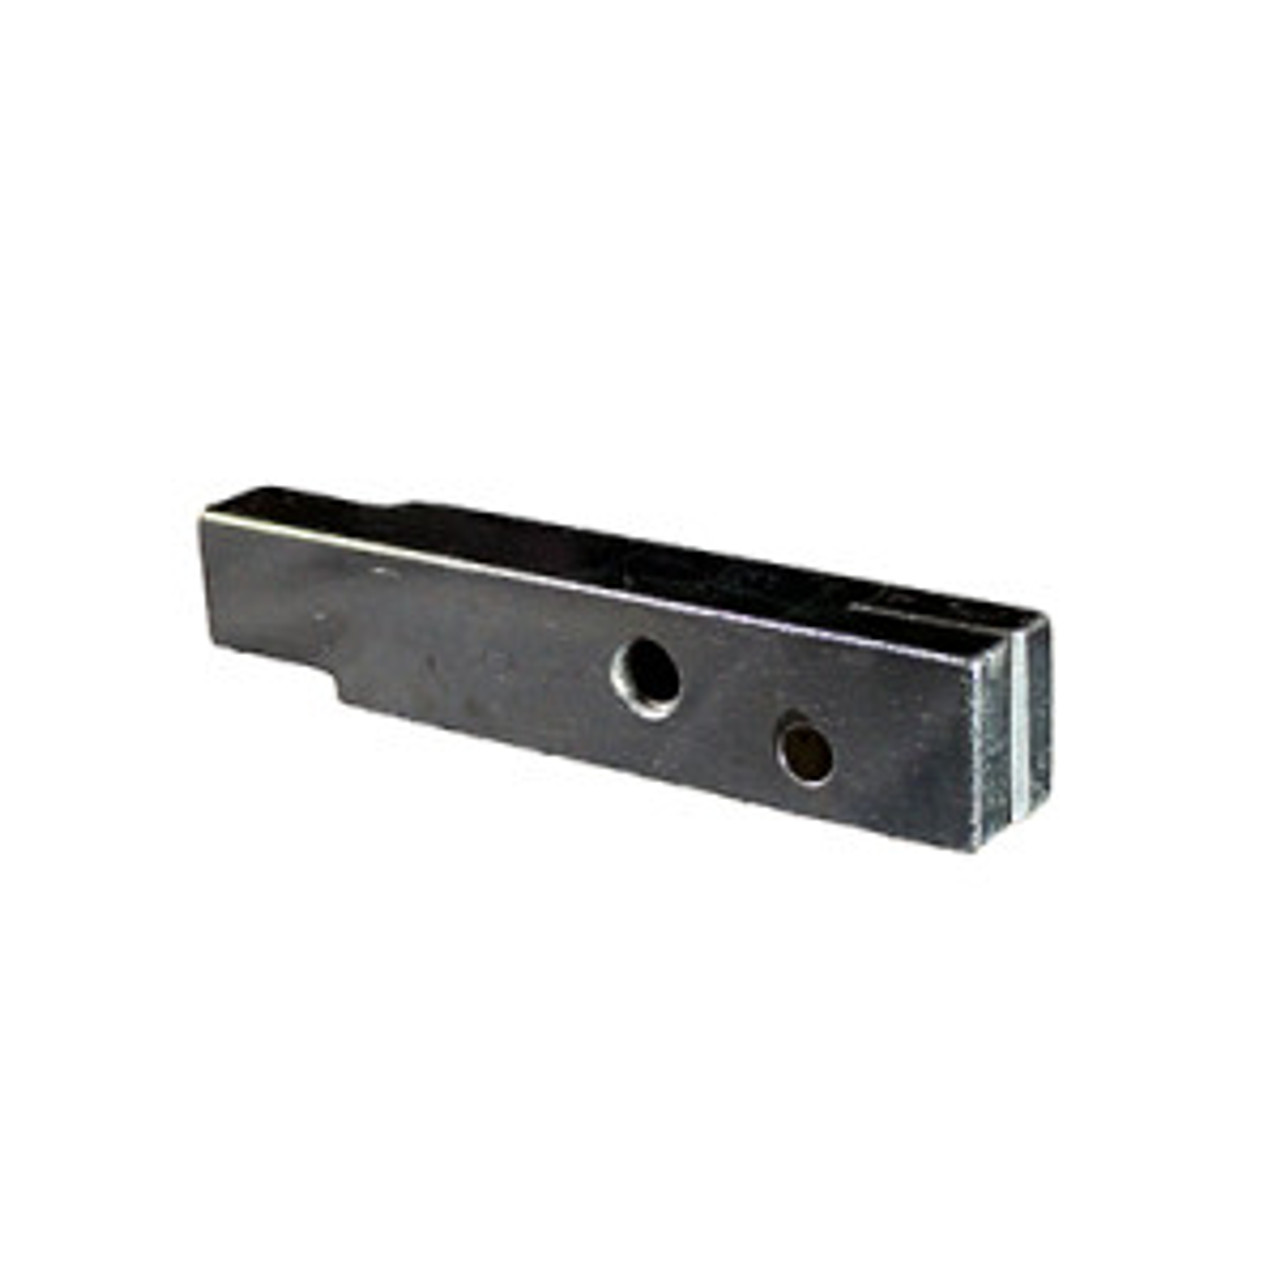 Hobart Meat Saw Lower Guide and Carbide Plug  291670-4